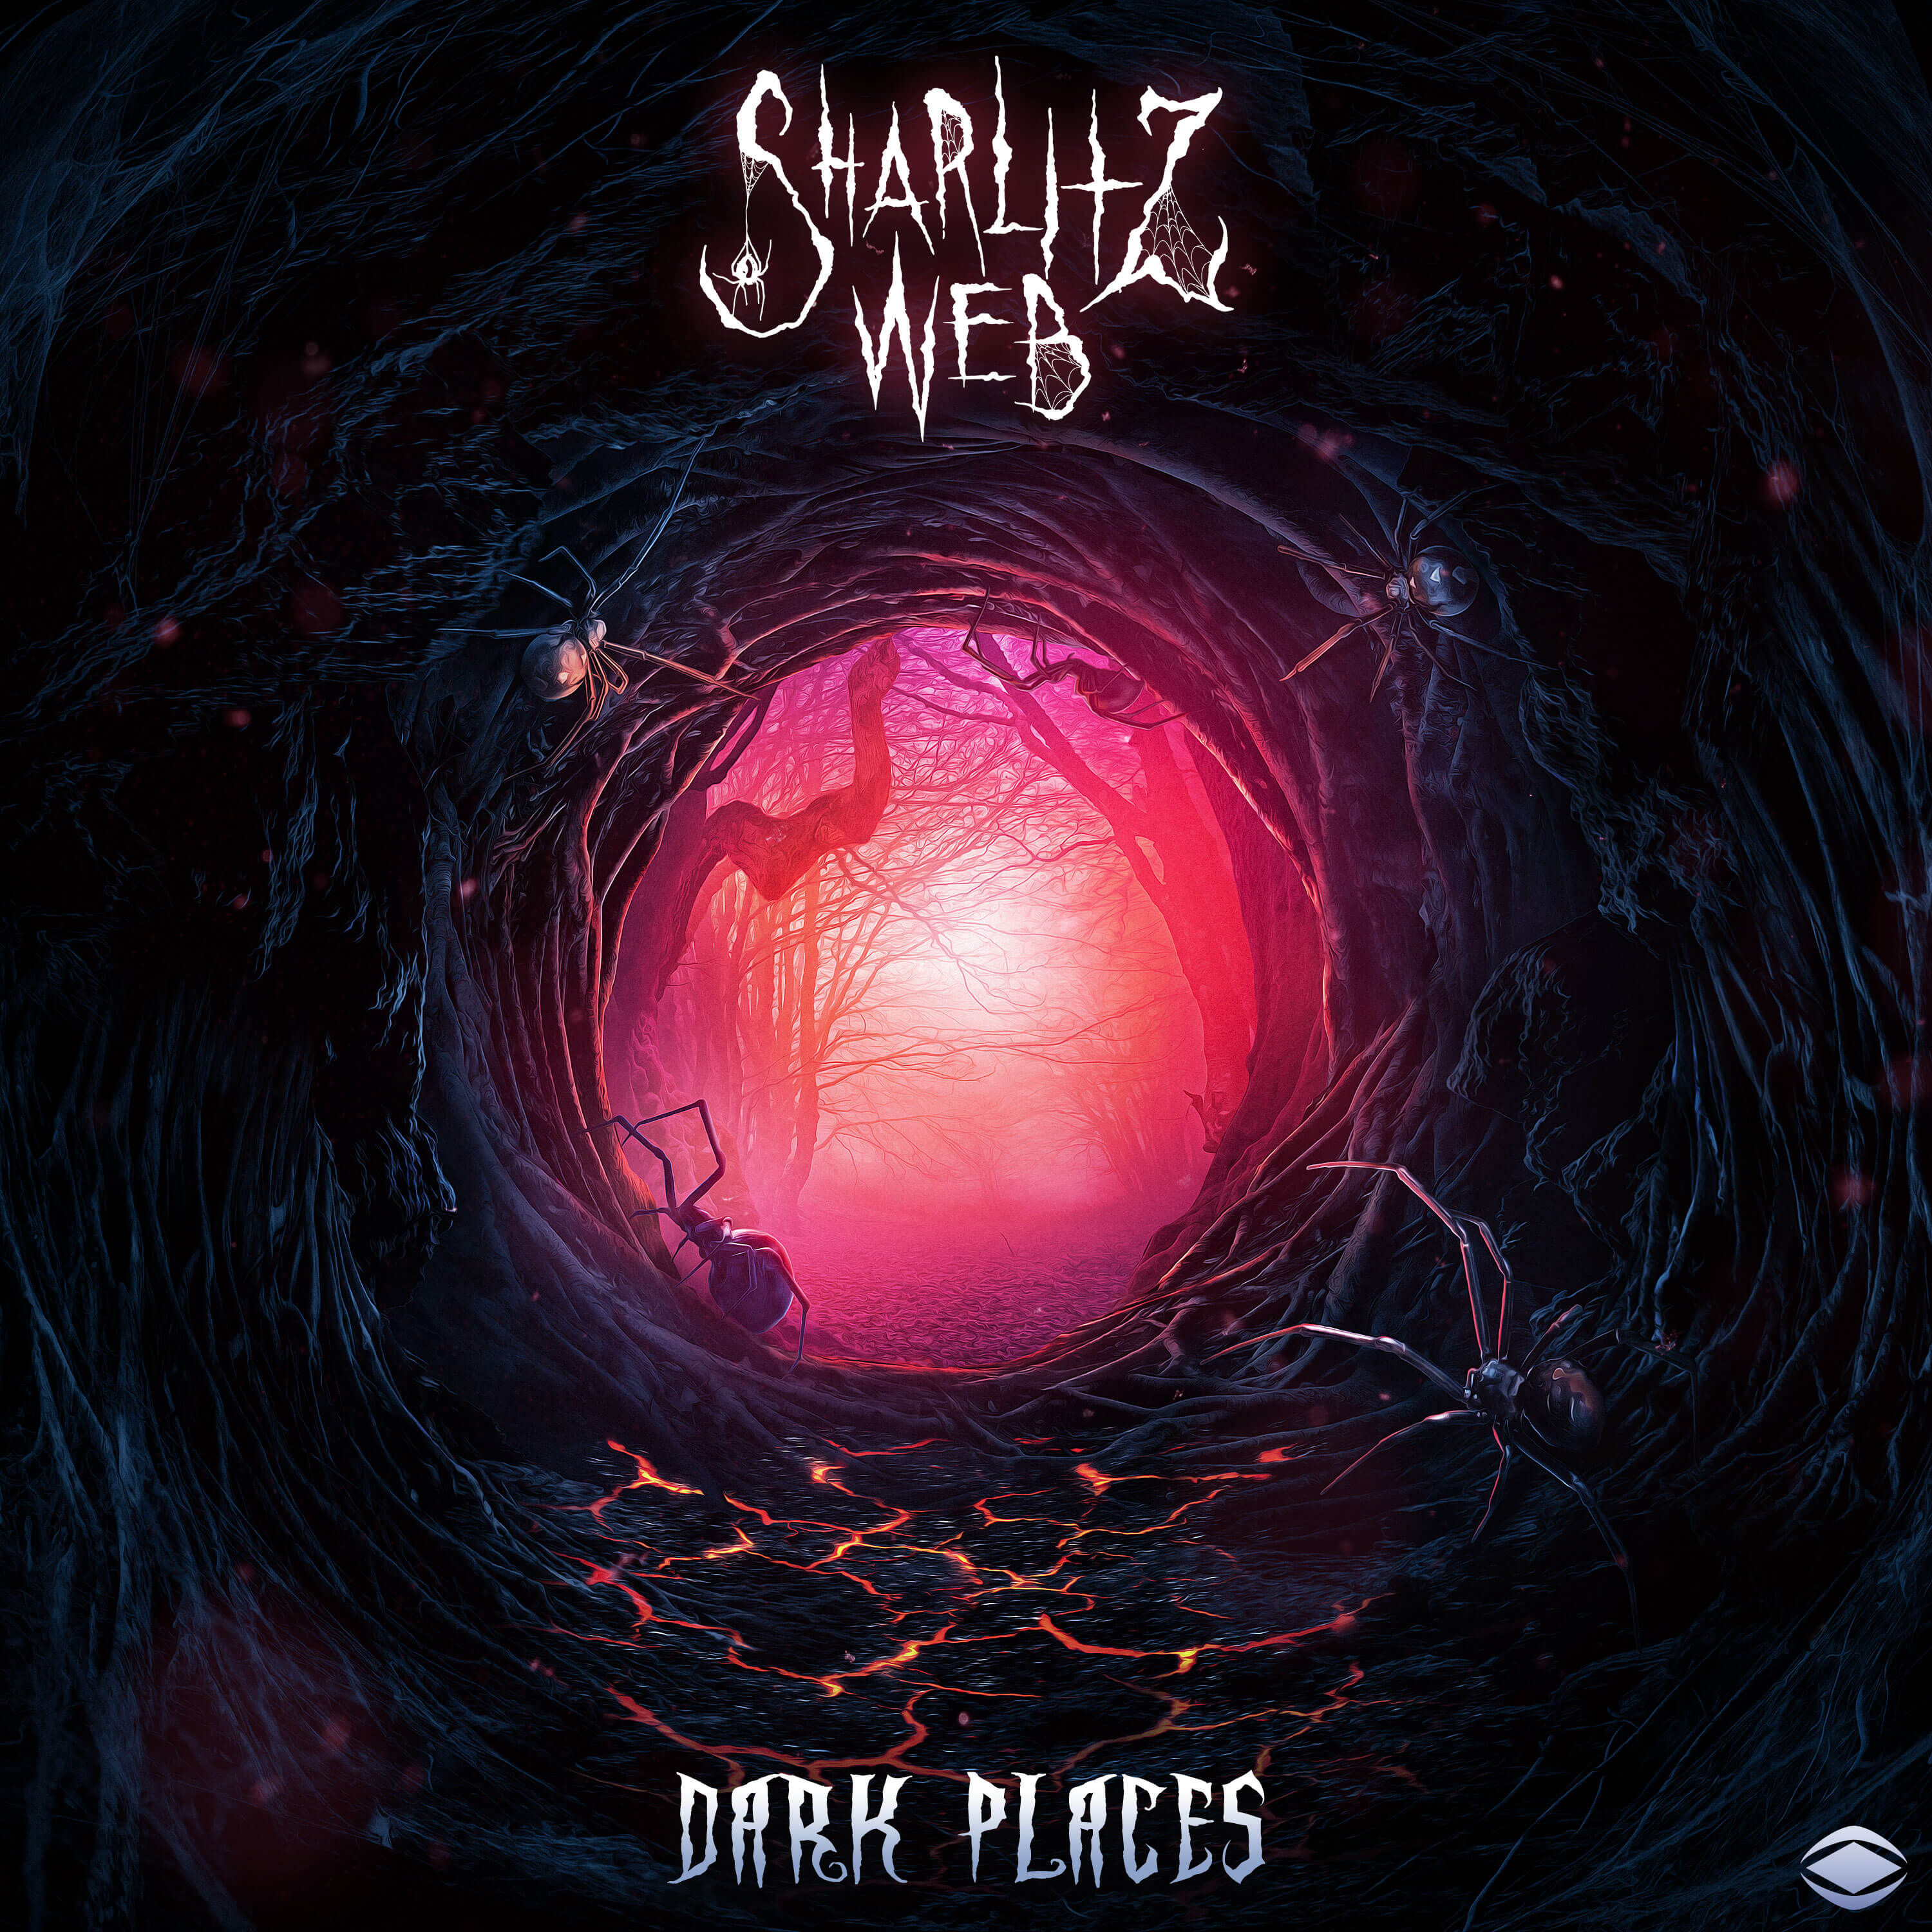 Get Tangled In sharlitz web’s New Track ‘Dark Places’